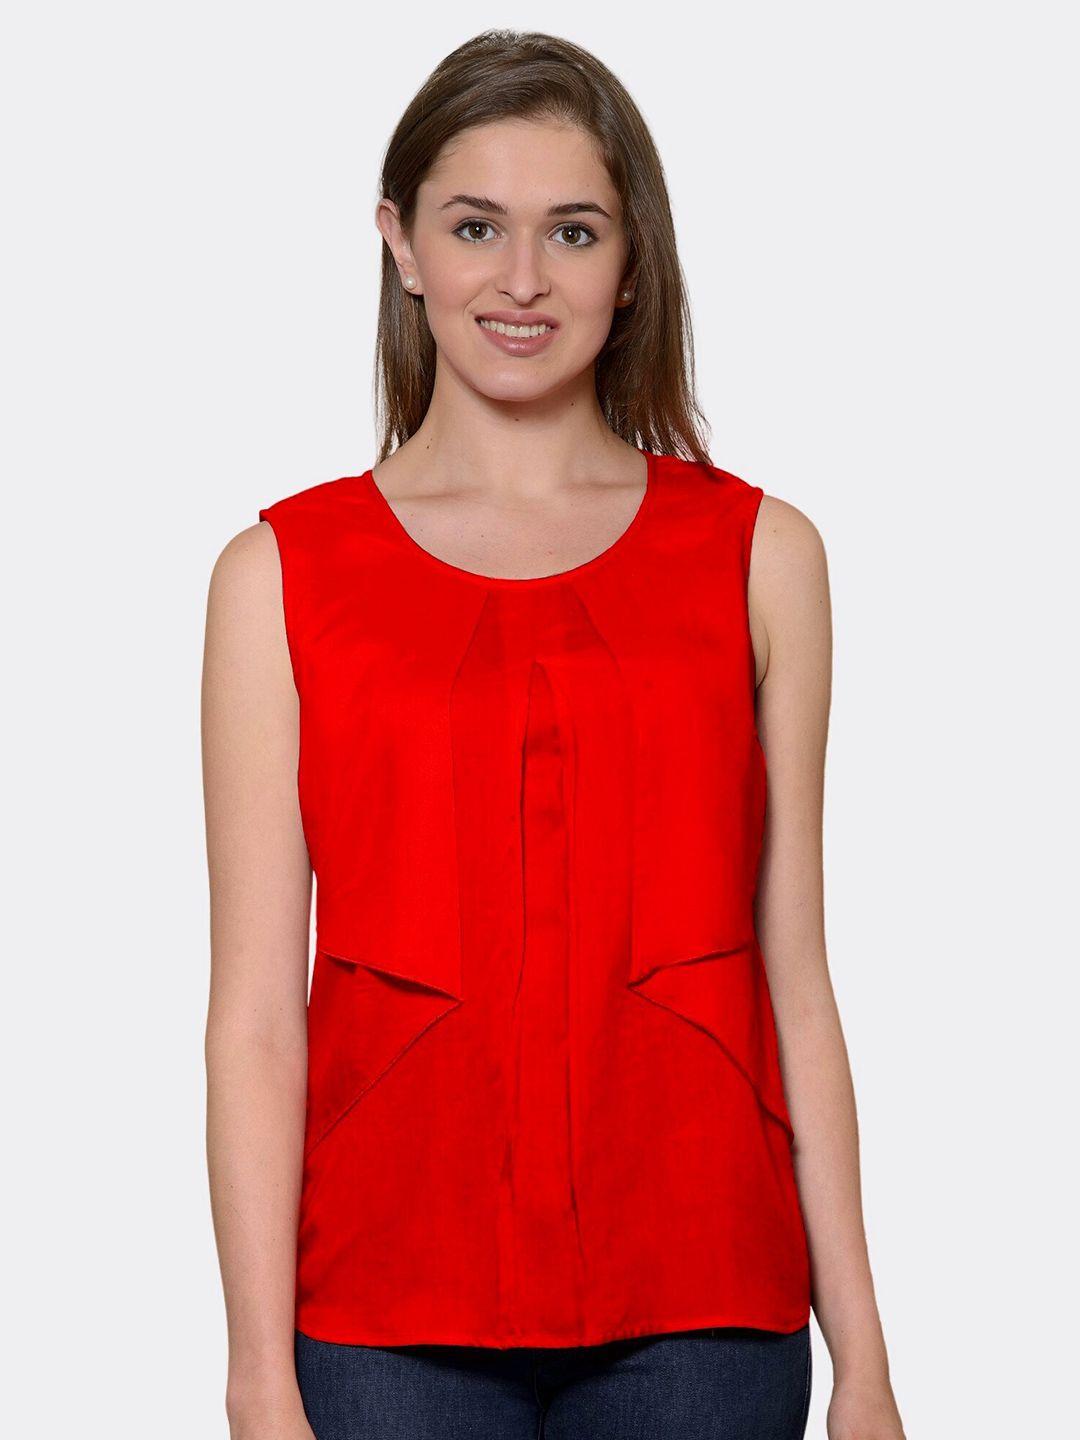 patrorna red layered top